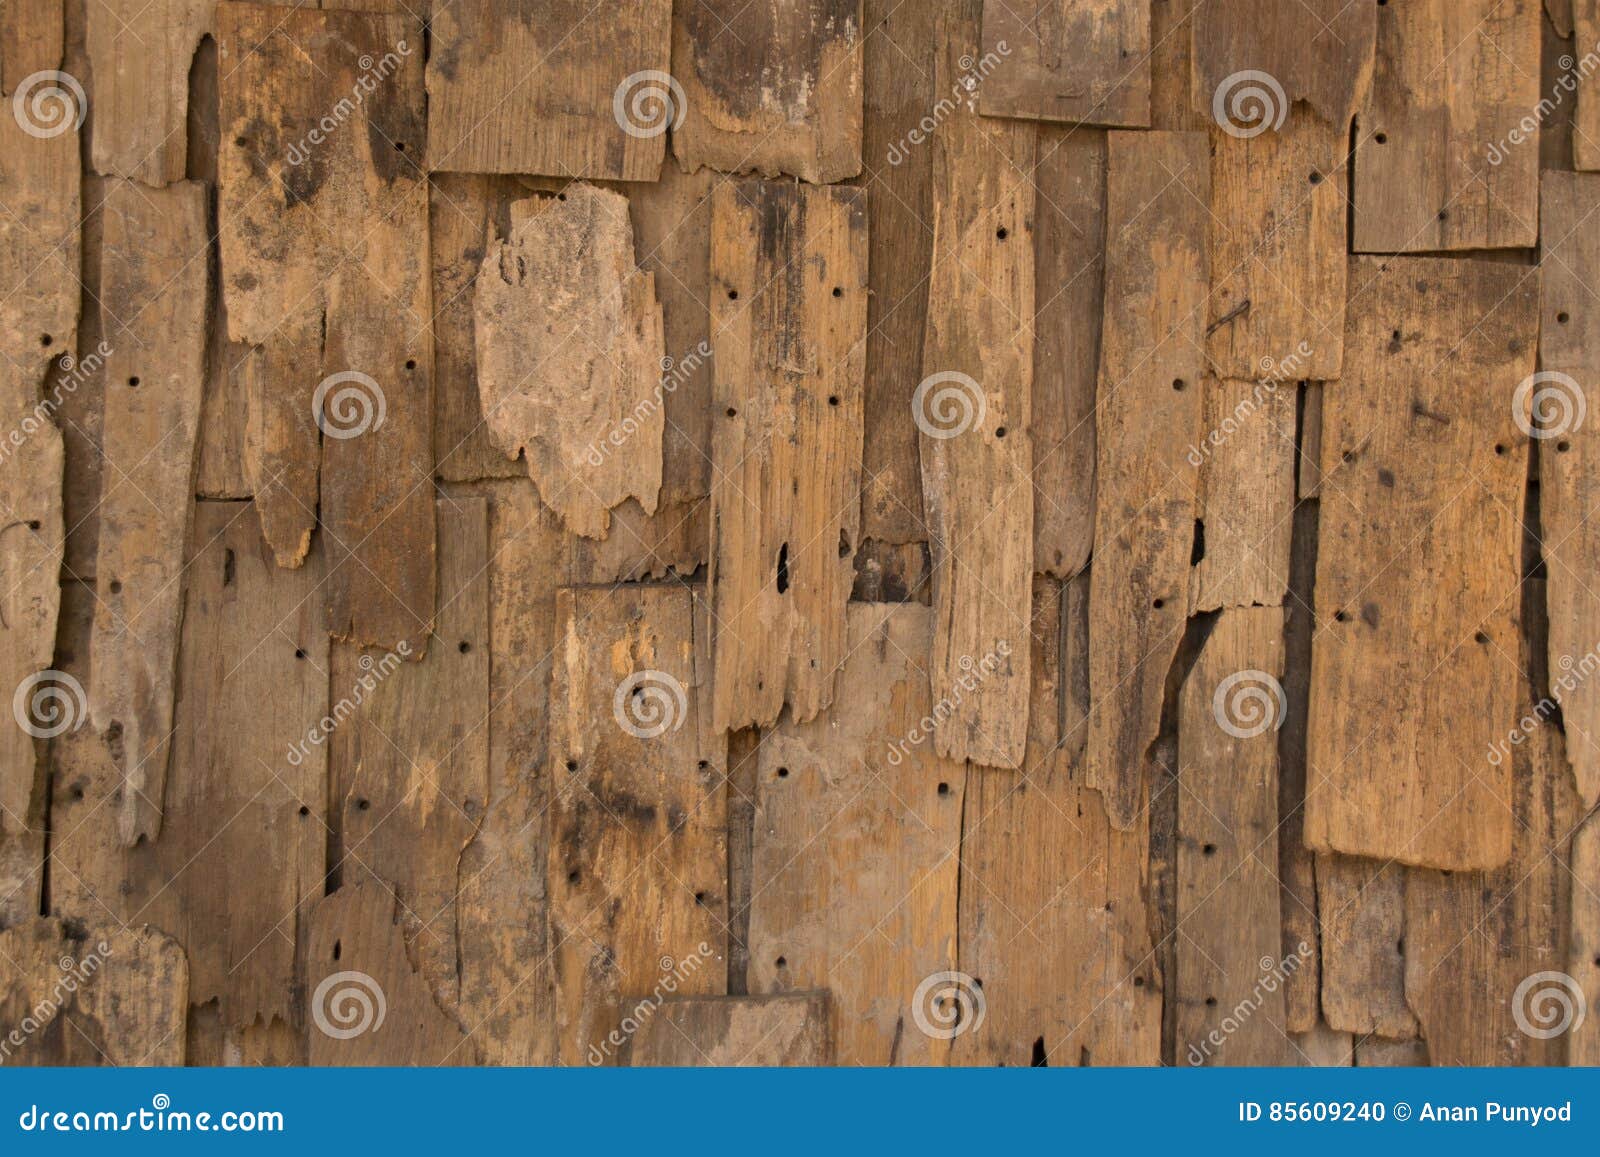 old slat wood wall vintage texture and background